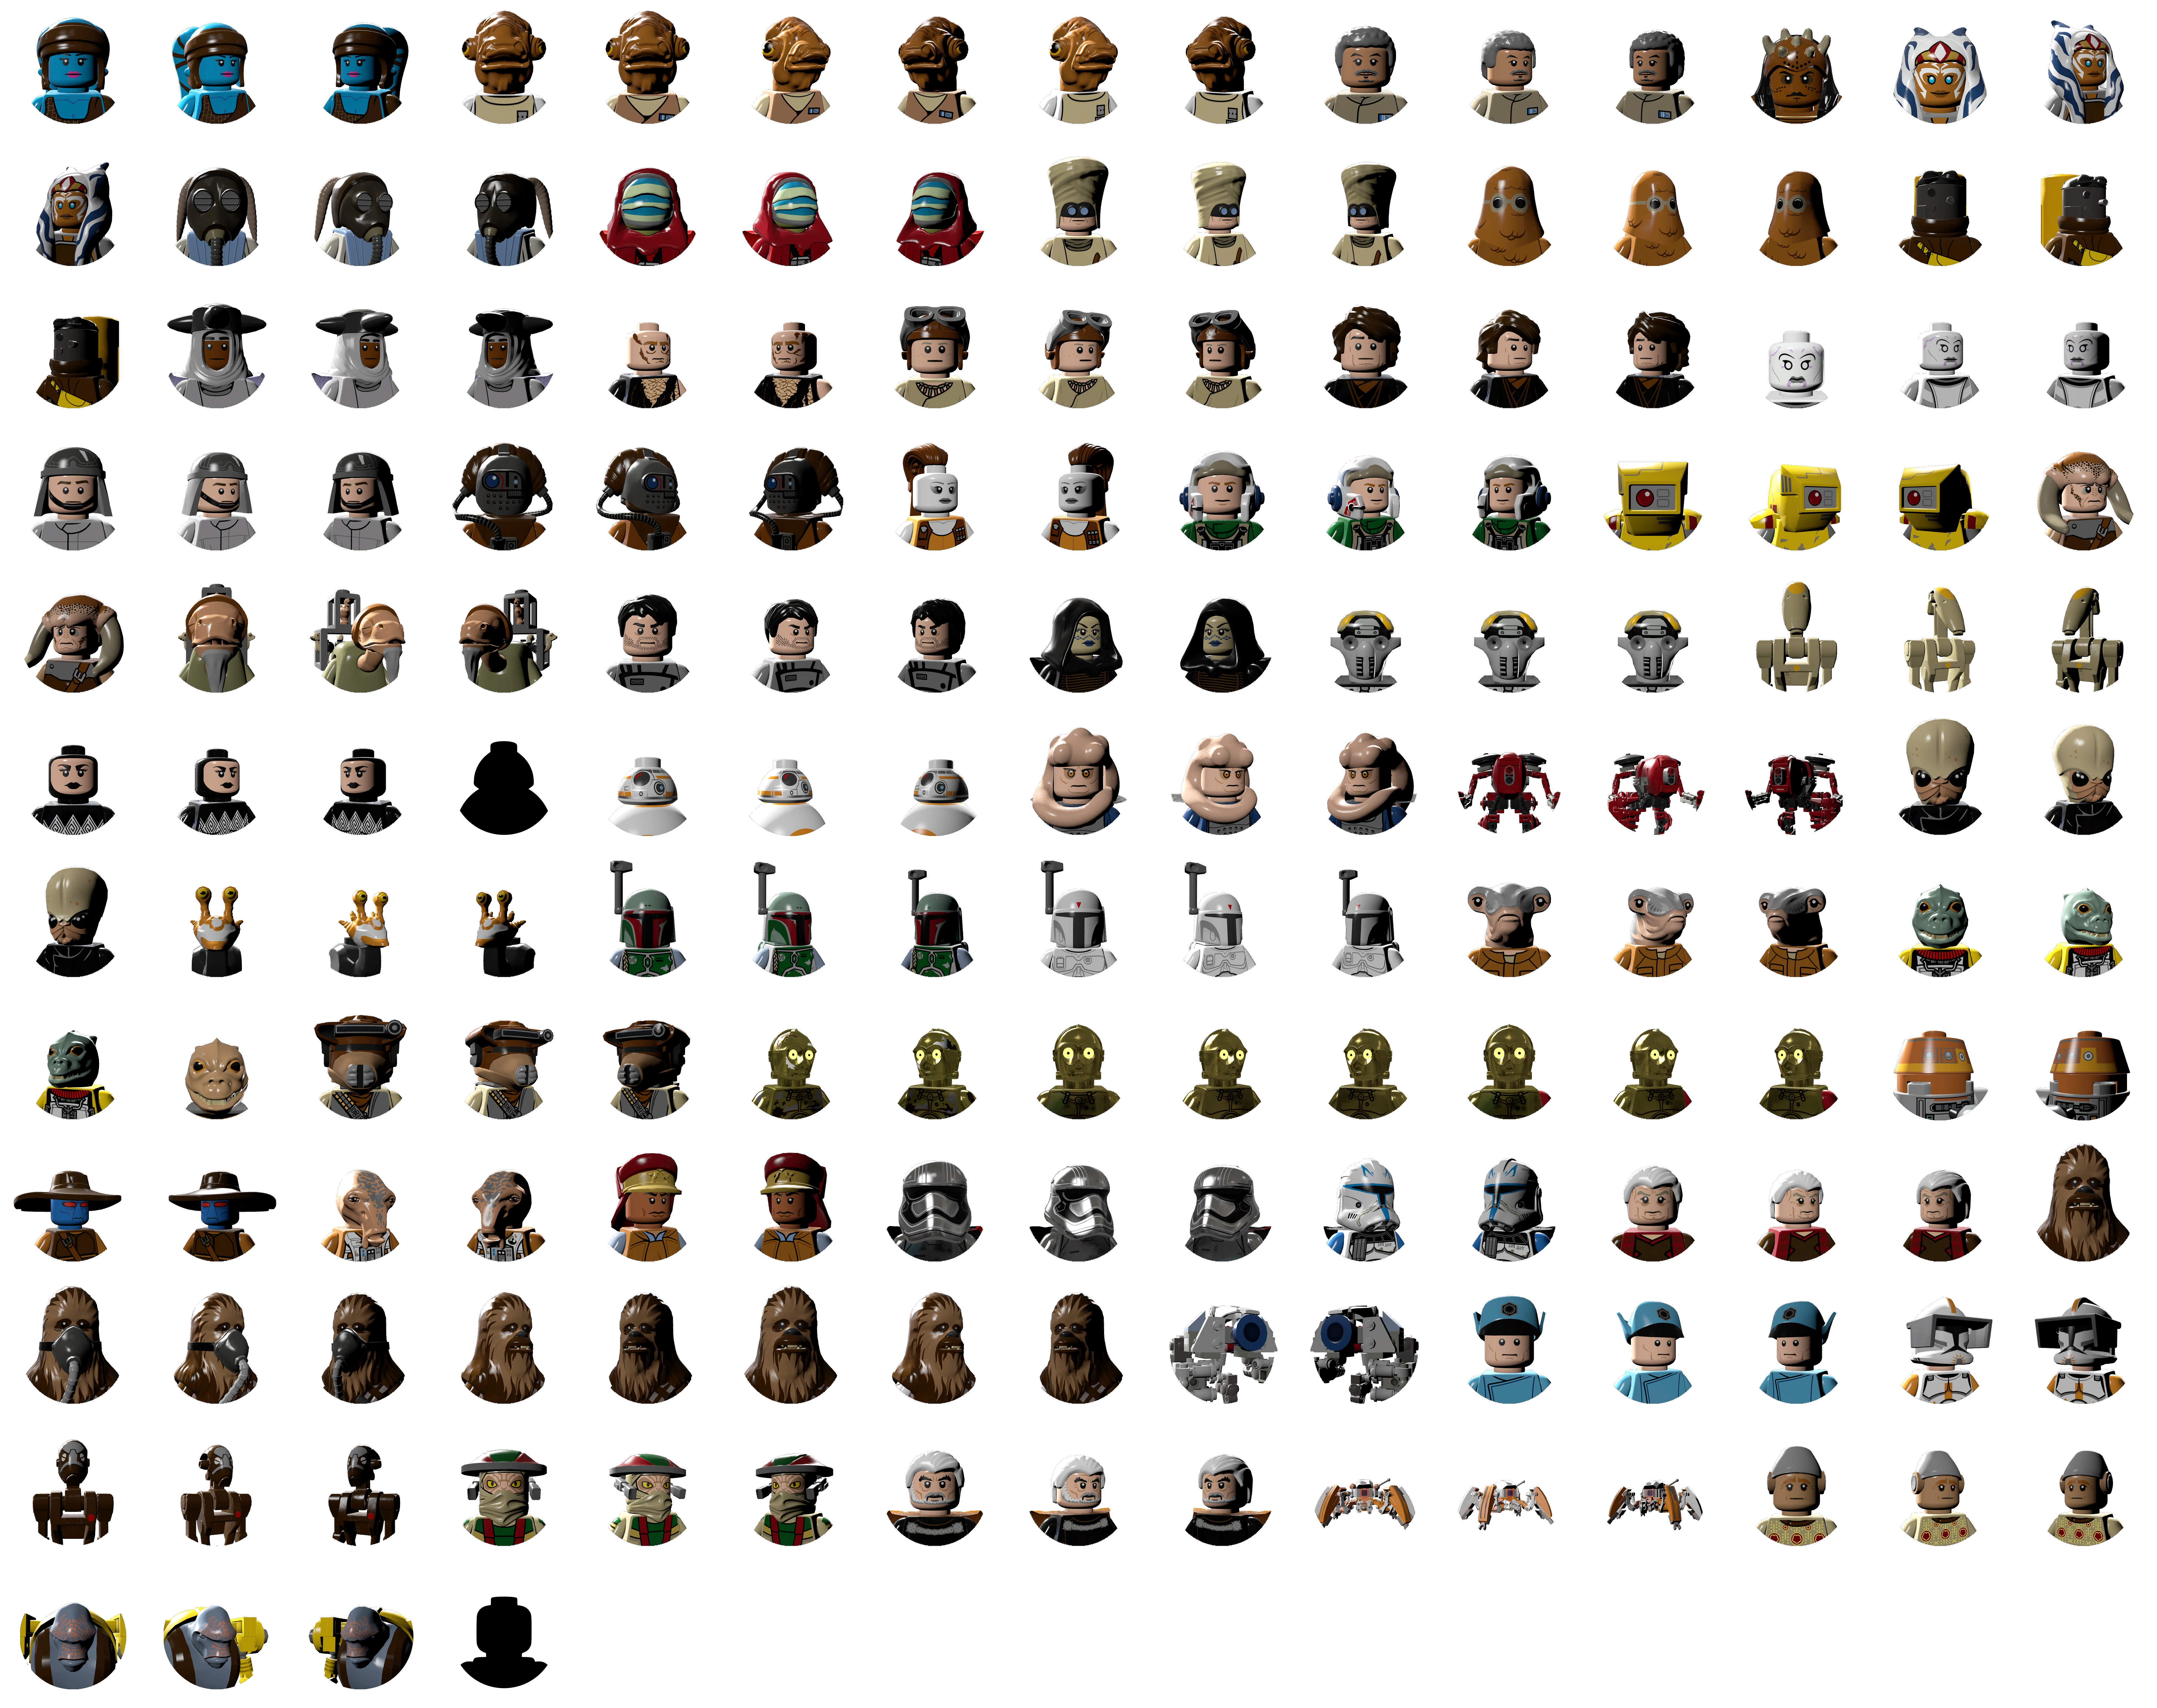 LEGO Star Wars: The Force Awakens - Character Icons (A-C)